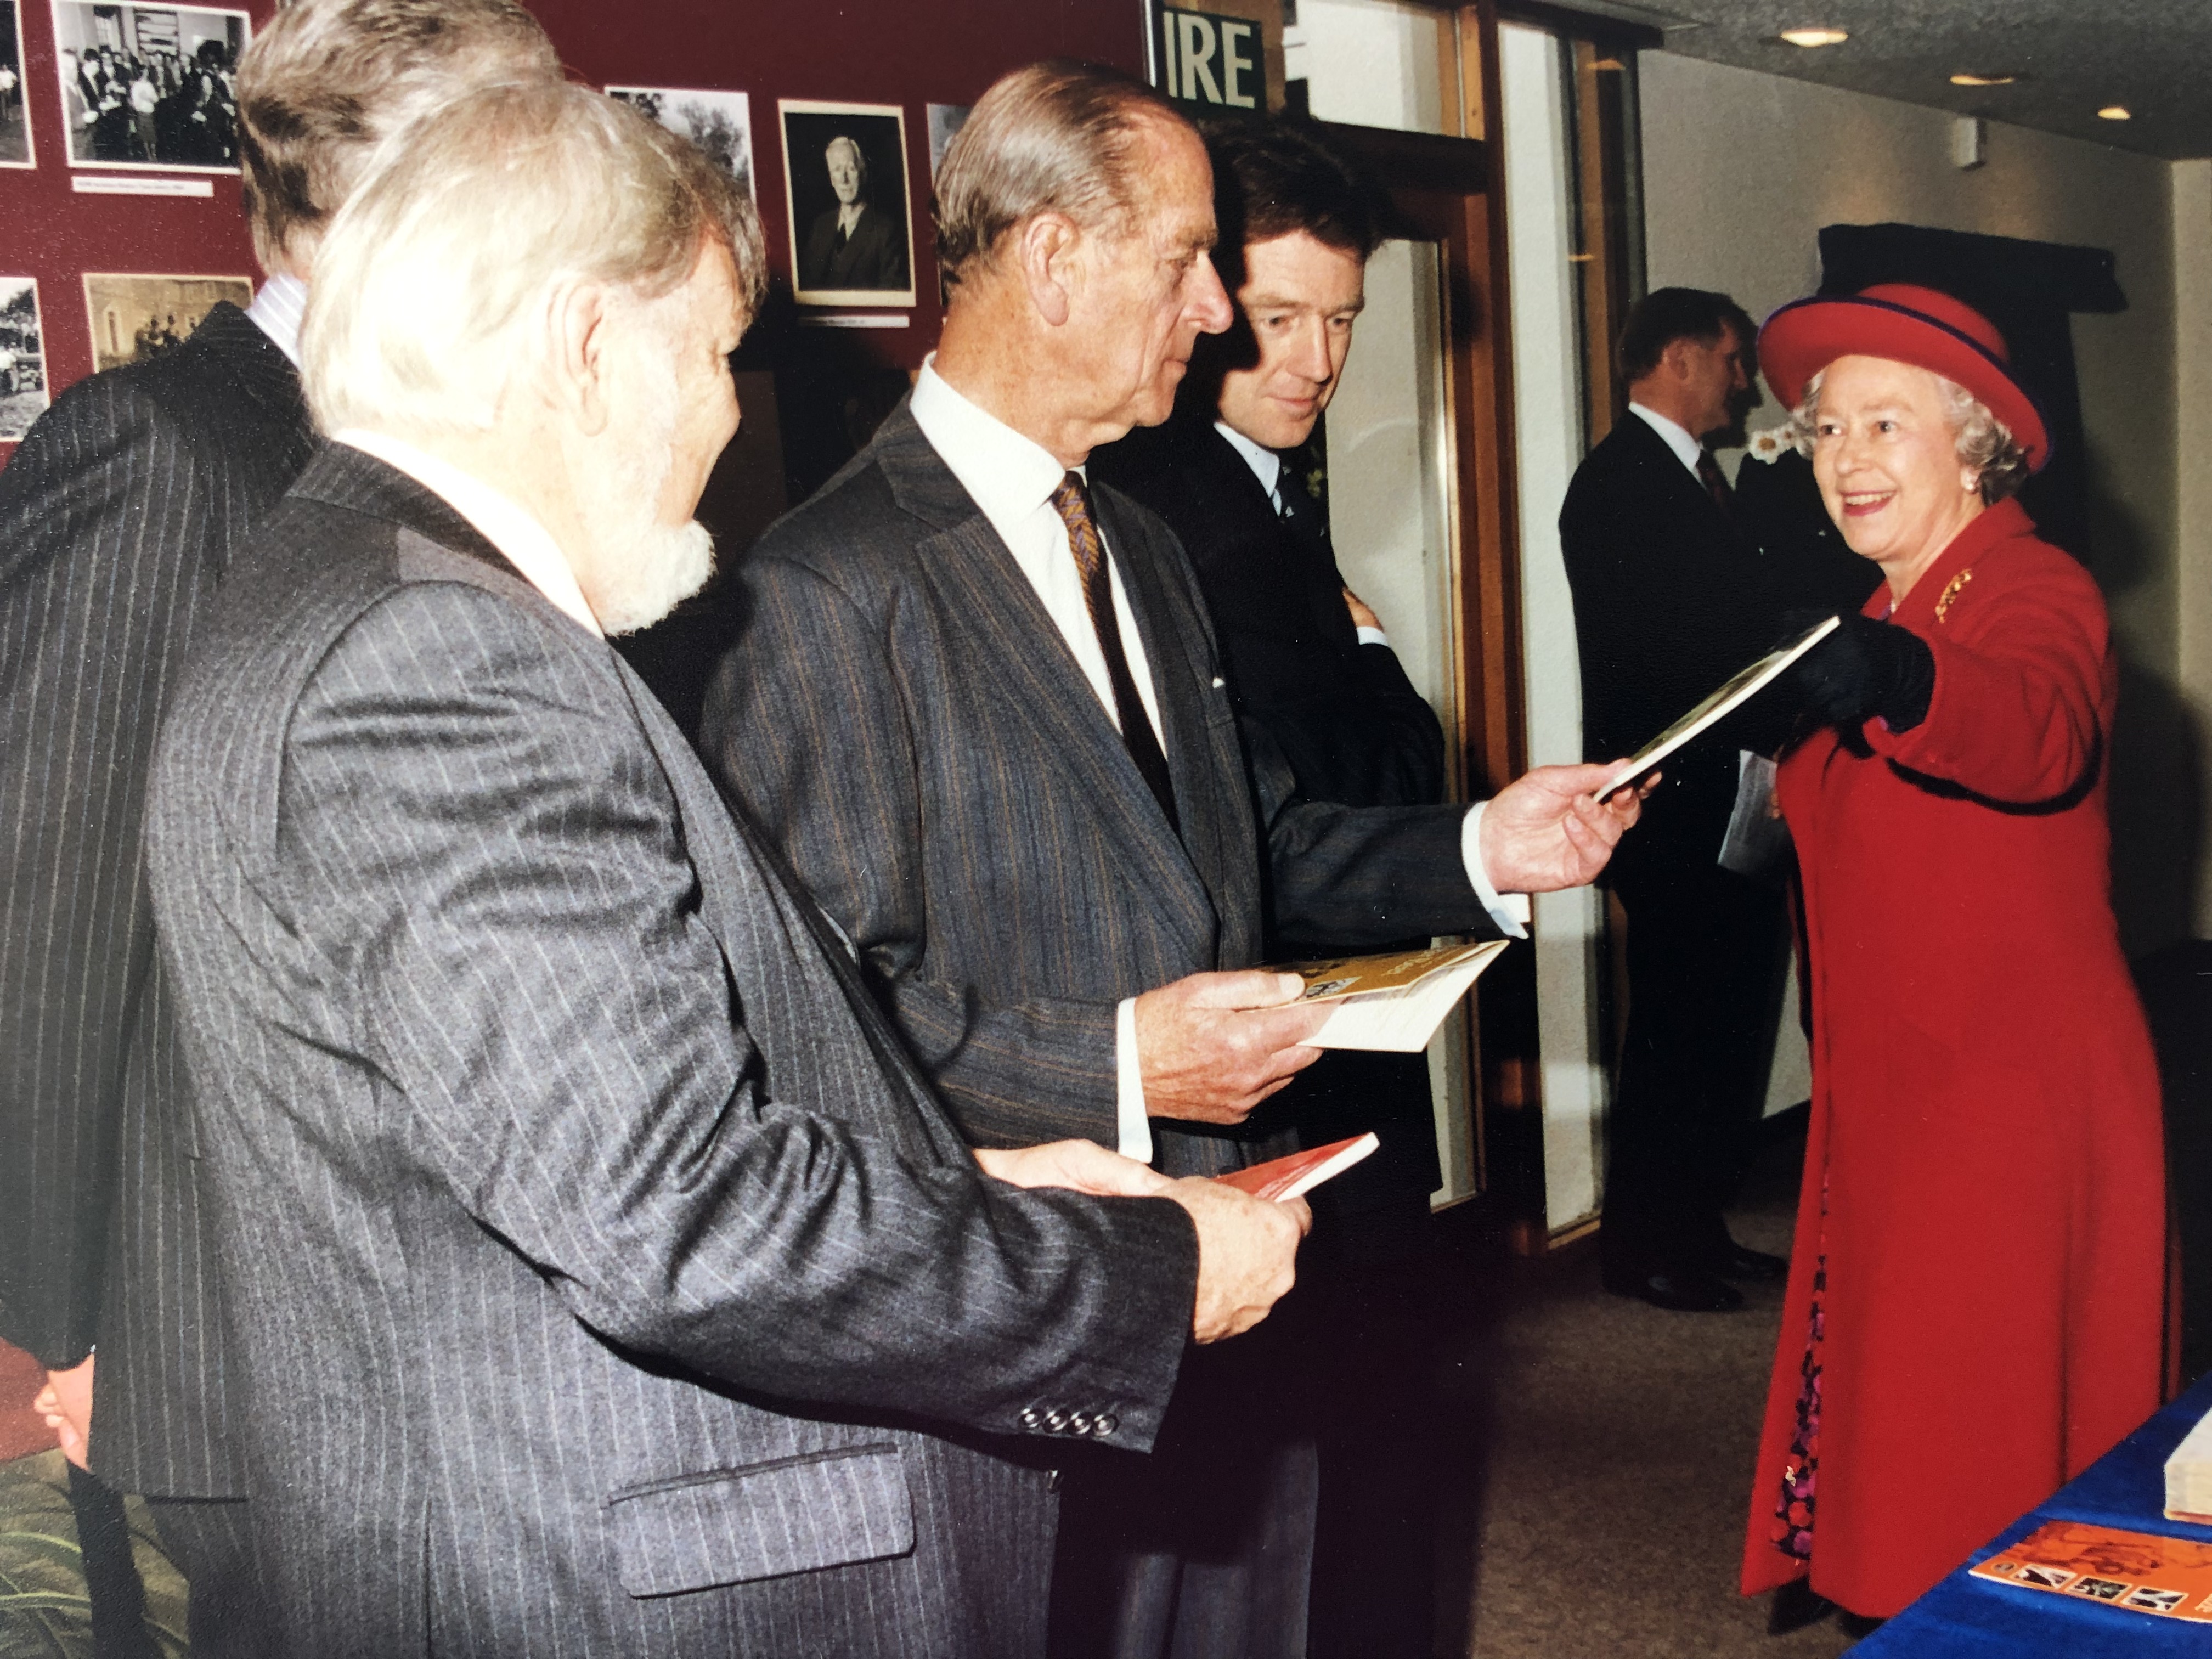 The Queen with the Duke of Edinburgh at NIAB in 1994